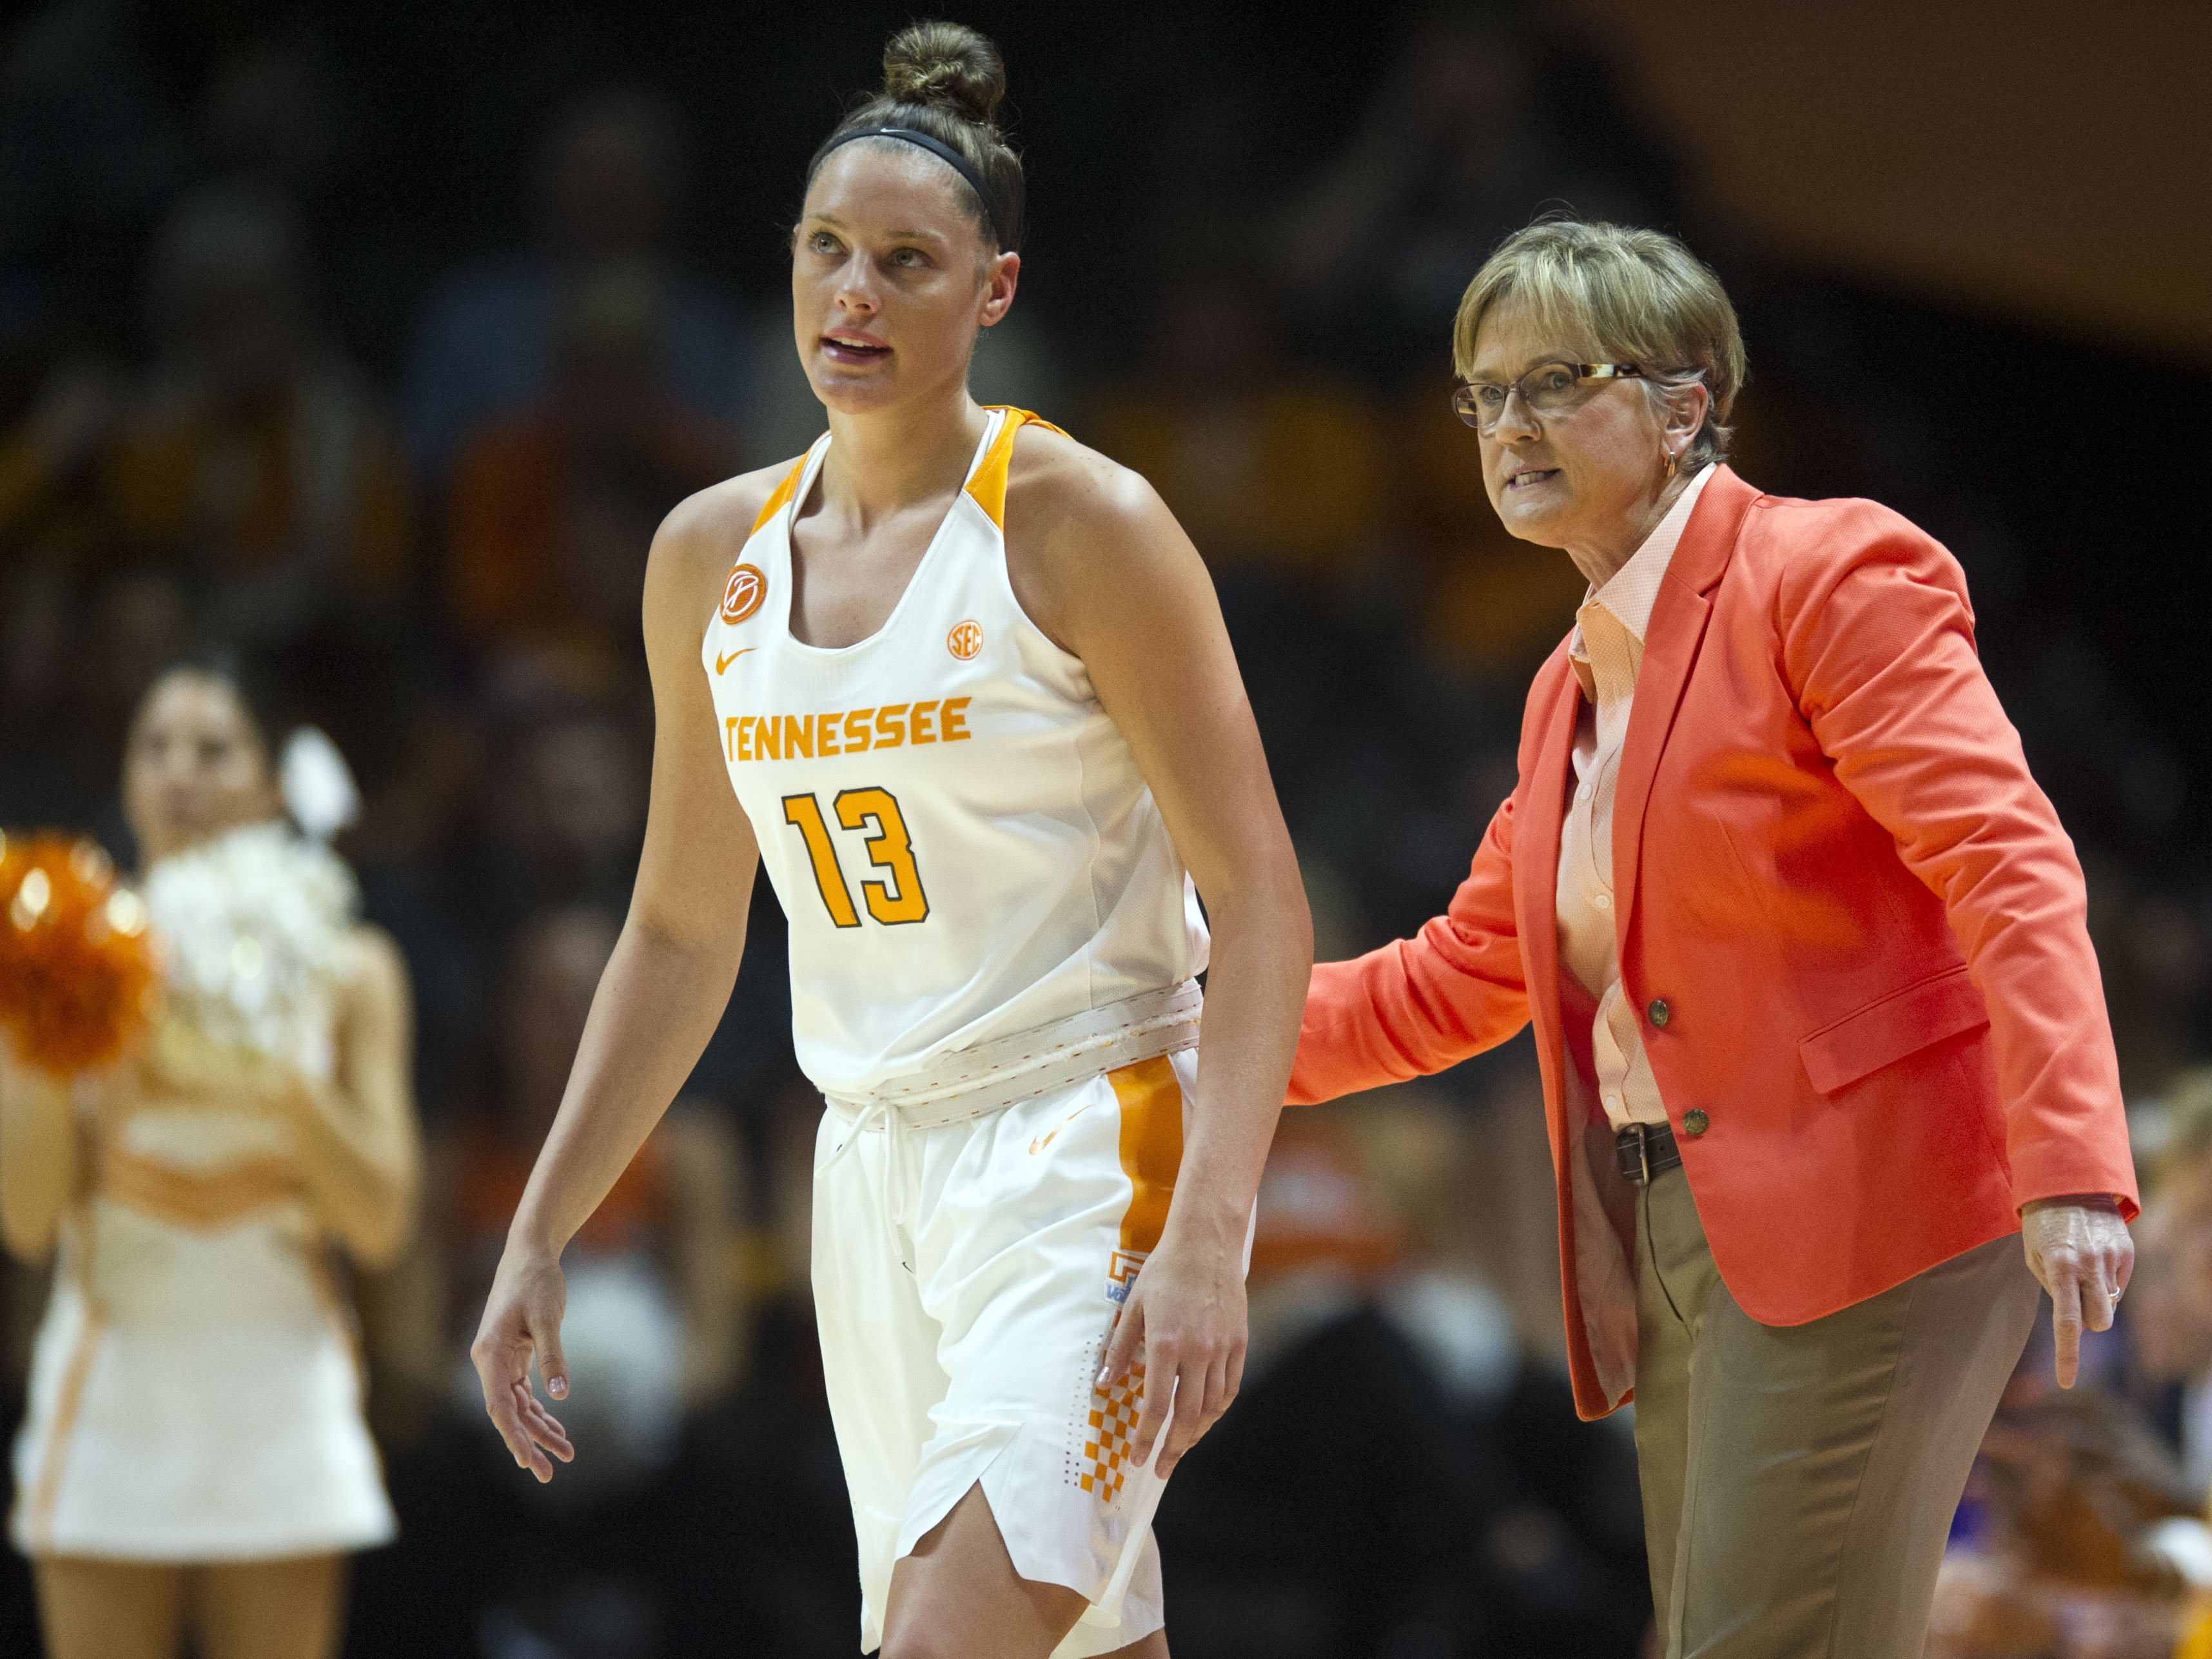 Tennessee Lady Vols Move Up to No. 15 in RPI After Florida Win